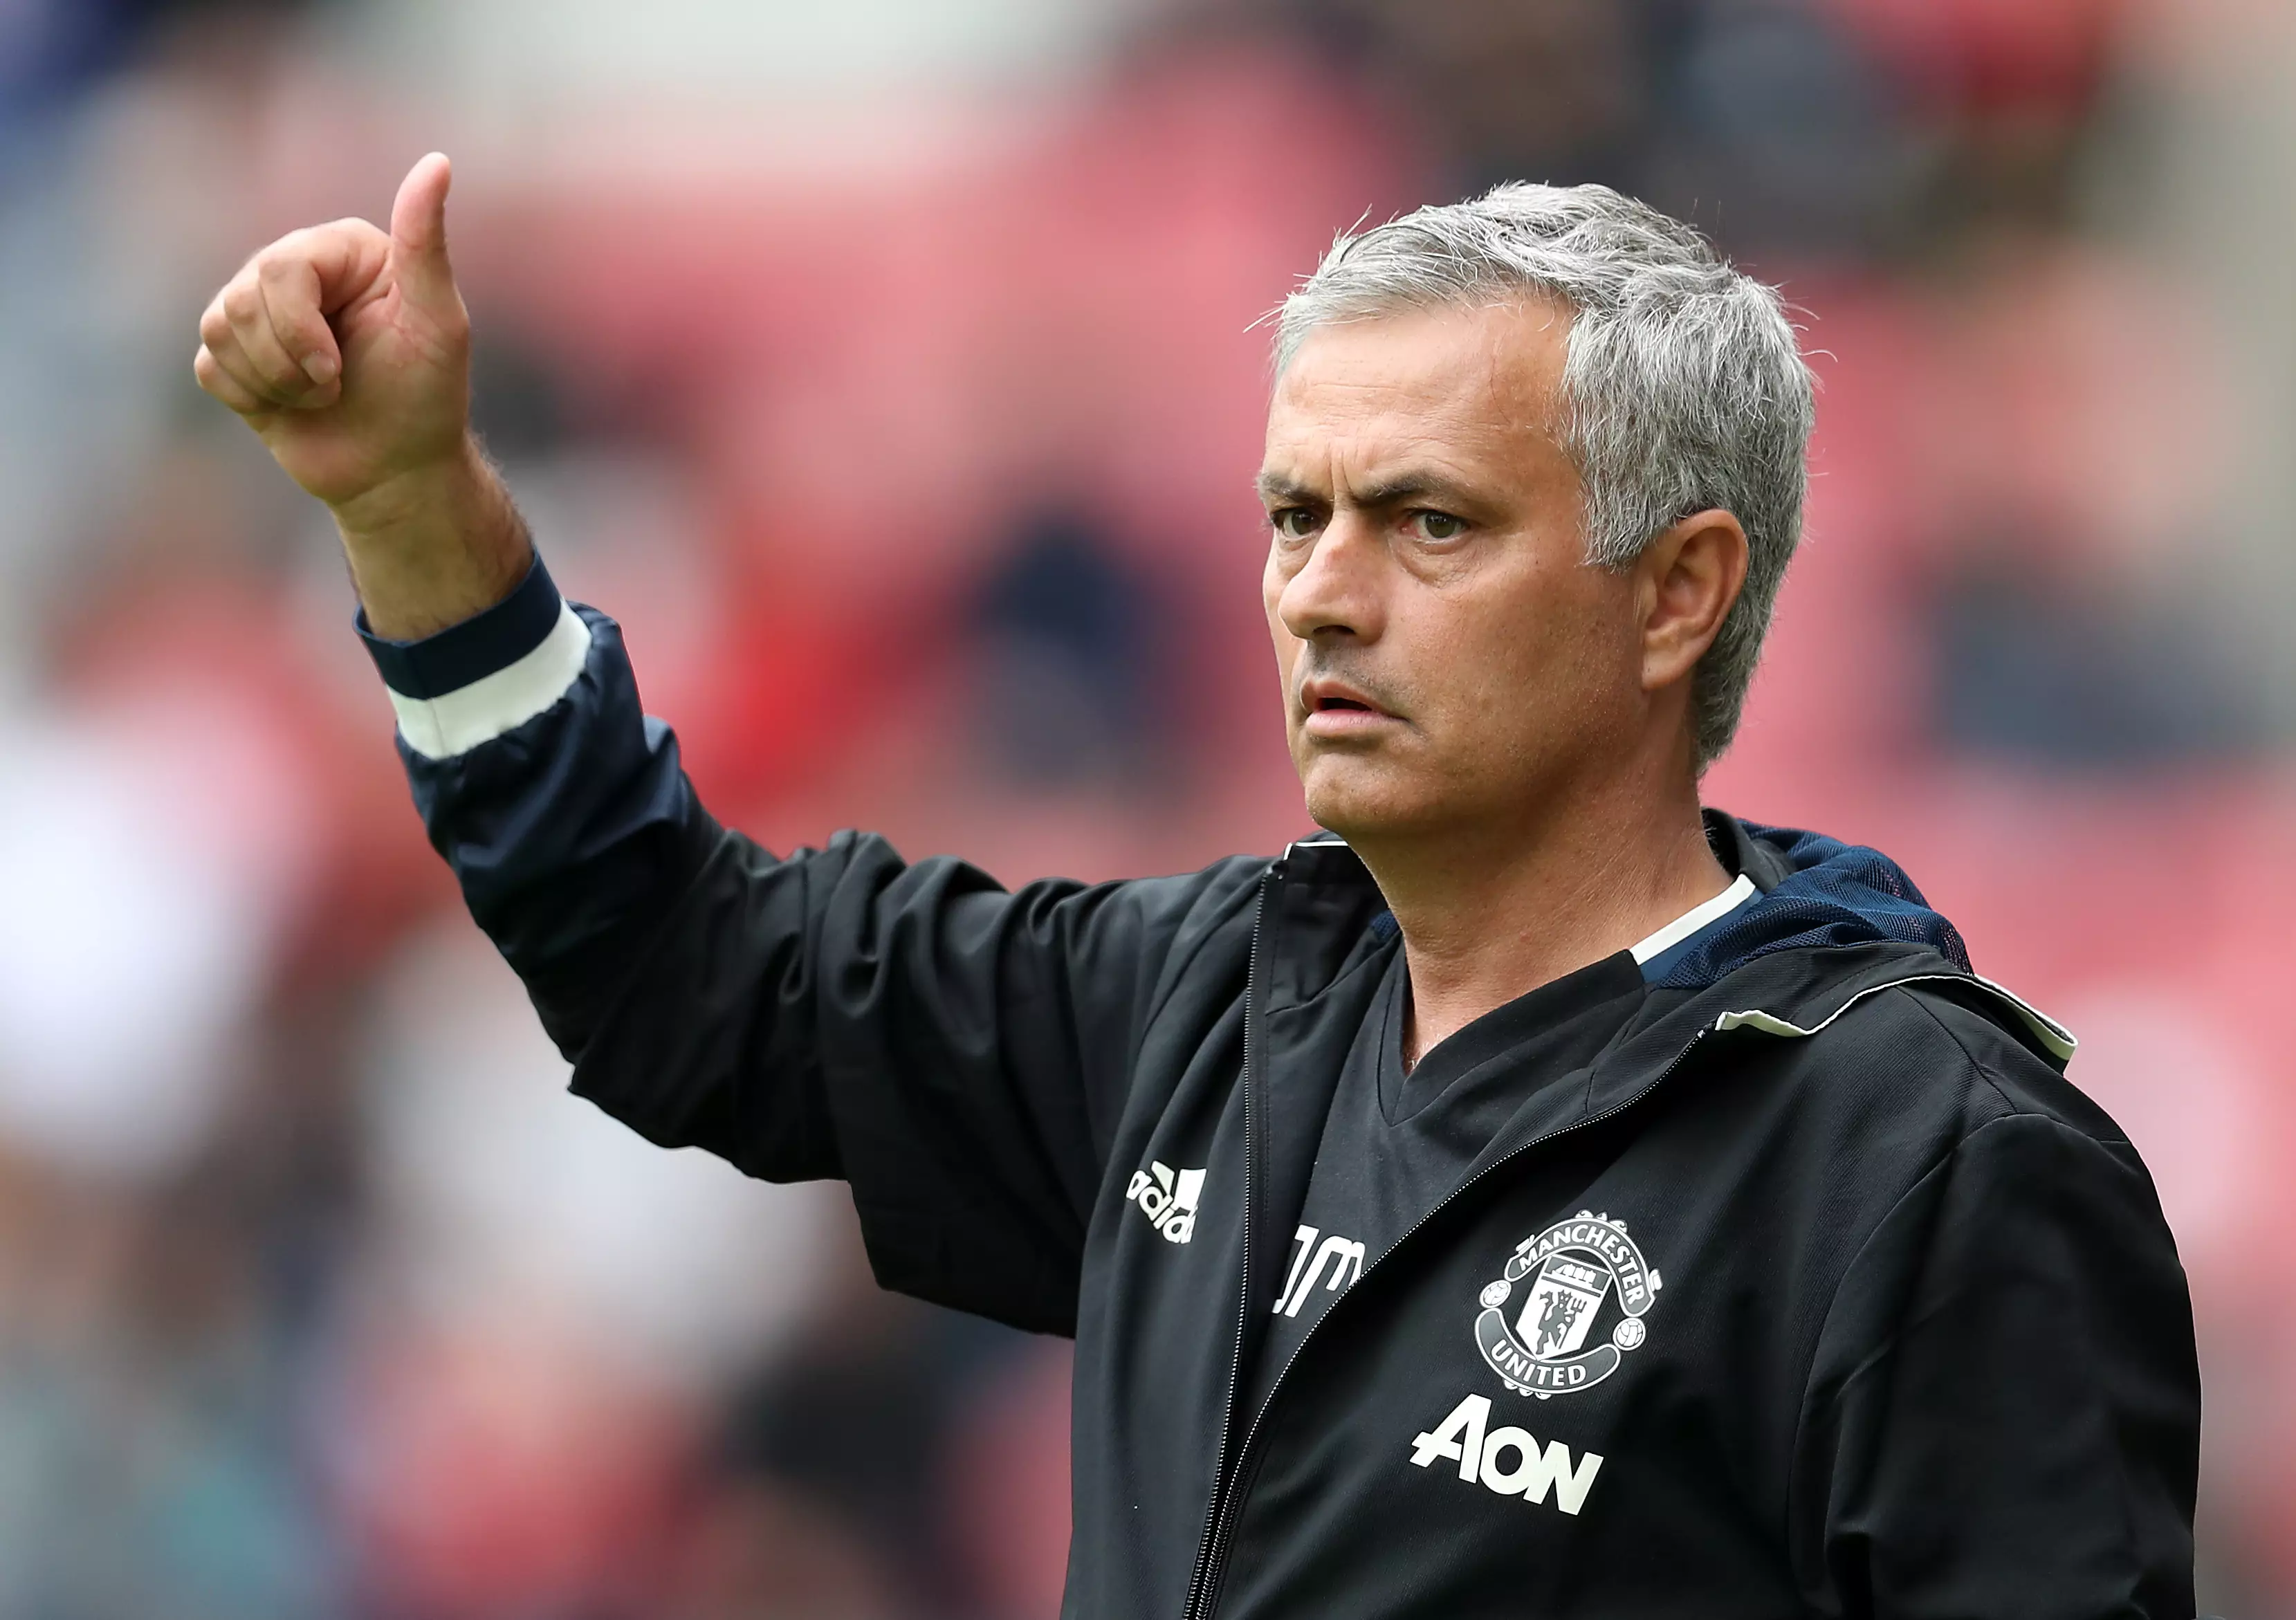 Mourinho Targeting Shock Return For Ex-United Player In January